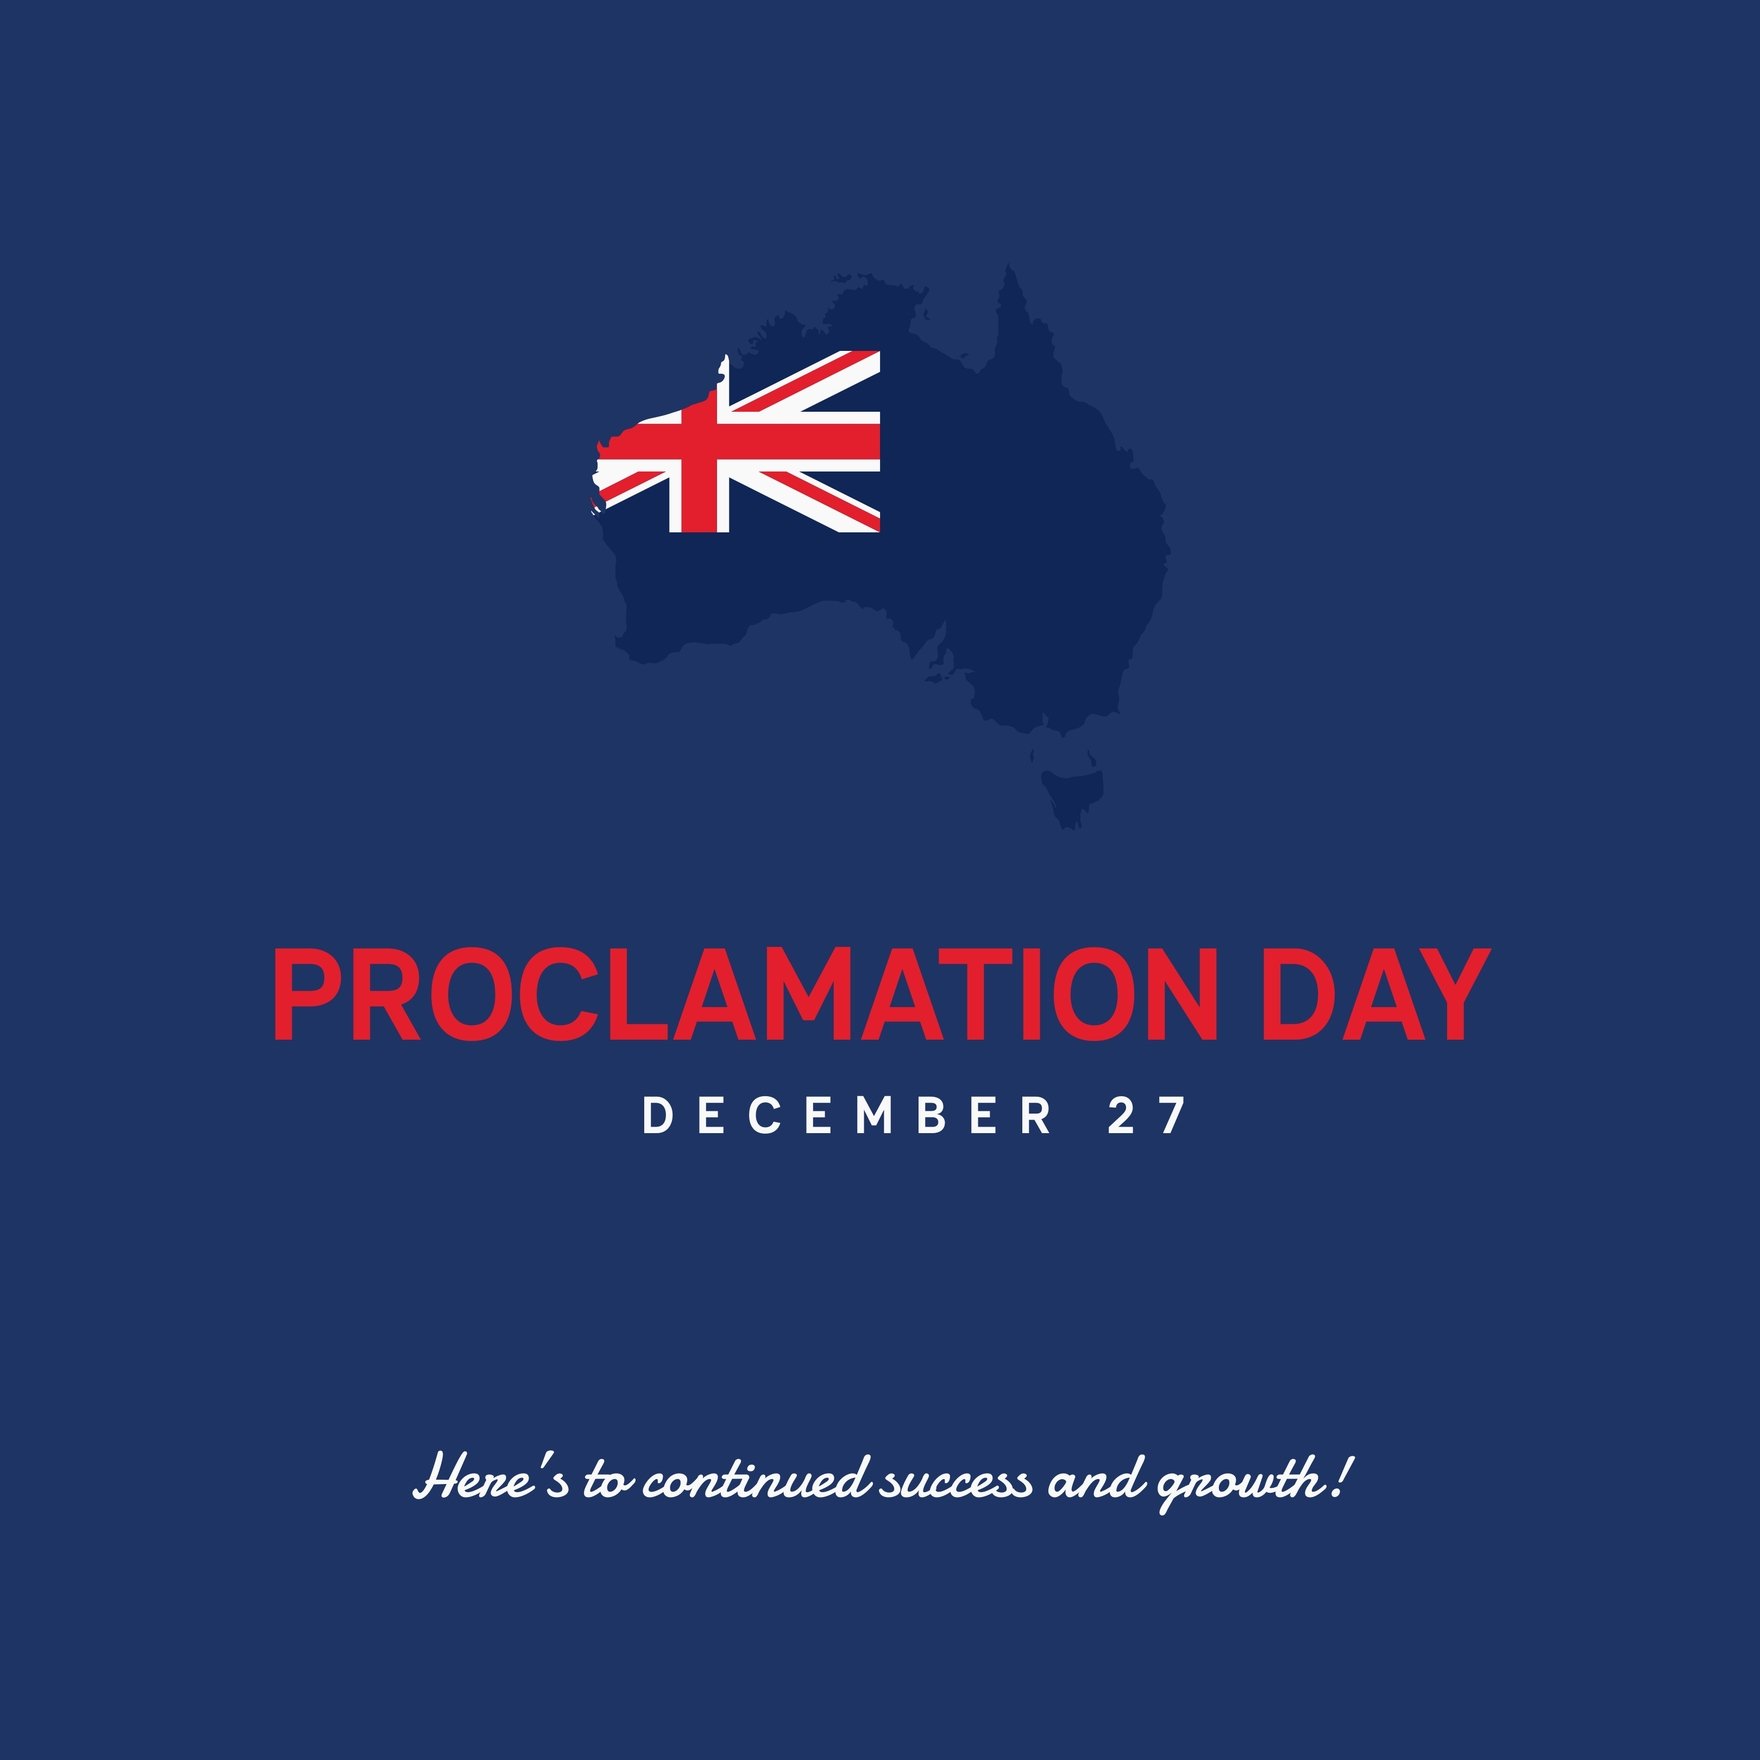 Proclamation Day Instagram Post